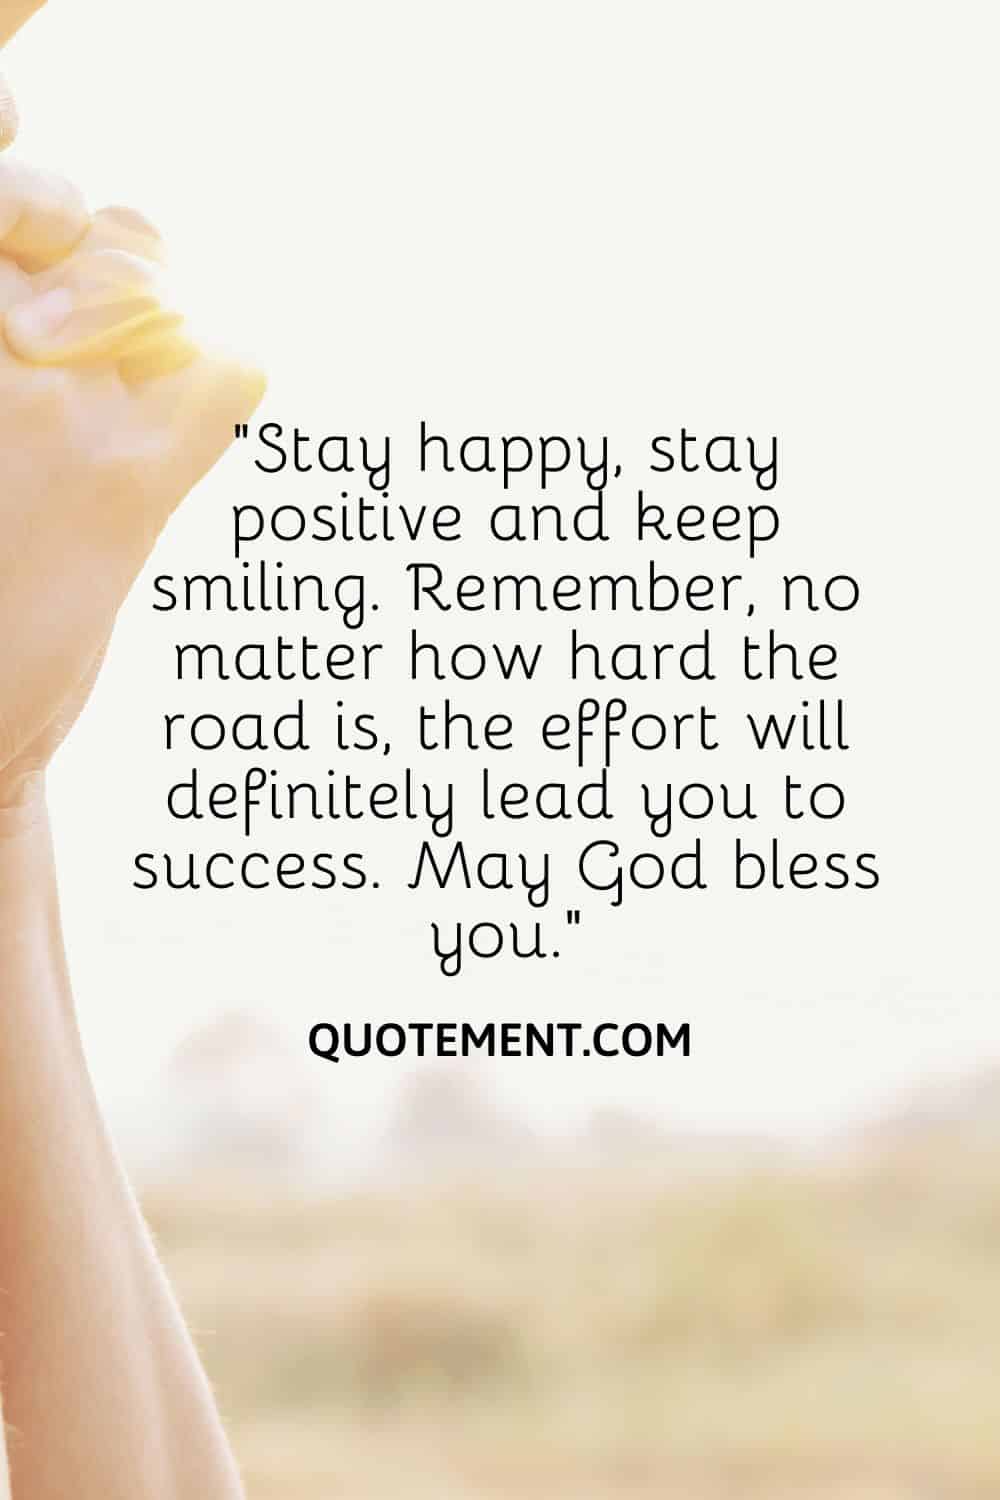 “Stay happy, stay positive and keep smiling. Remember, no matter how hard the road is, the effort will definitely lead you to success. May God bless you.”